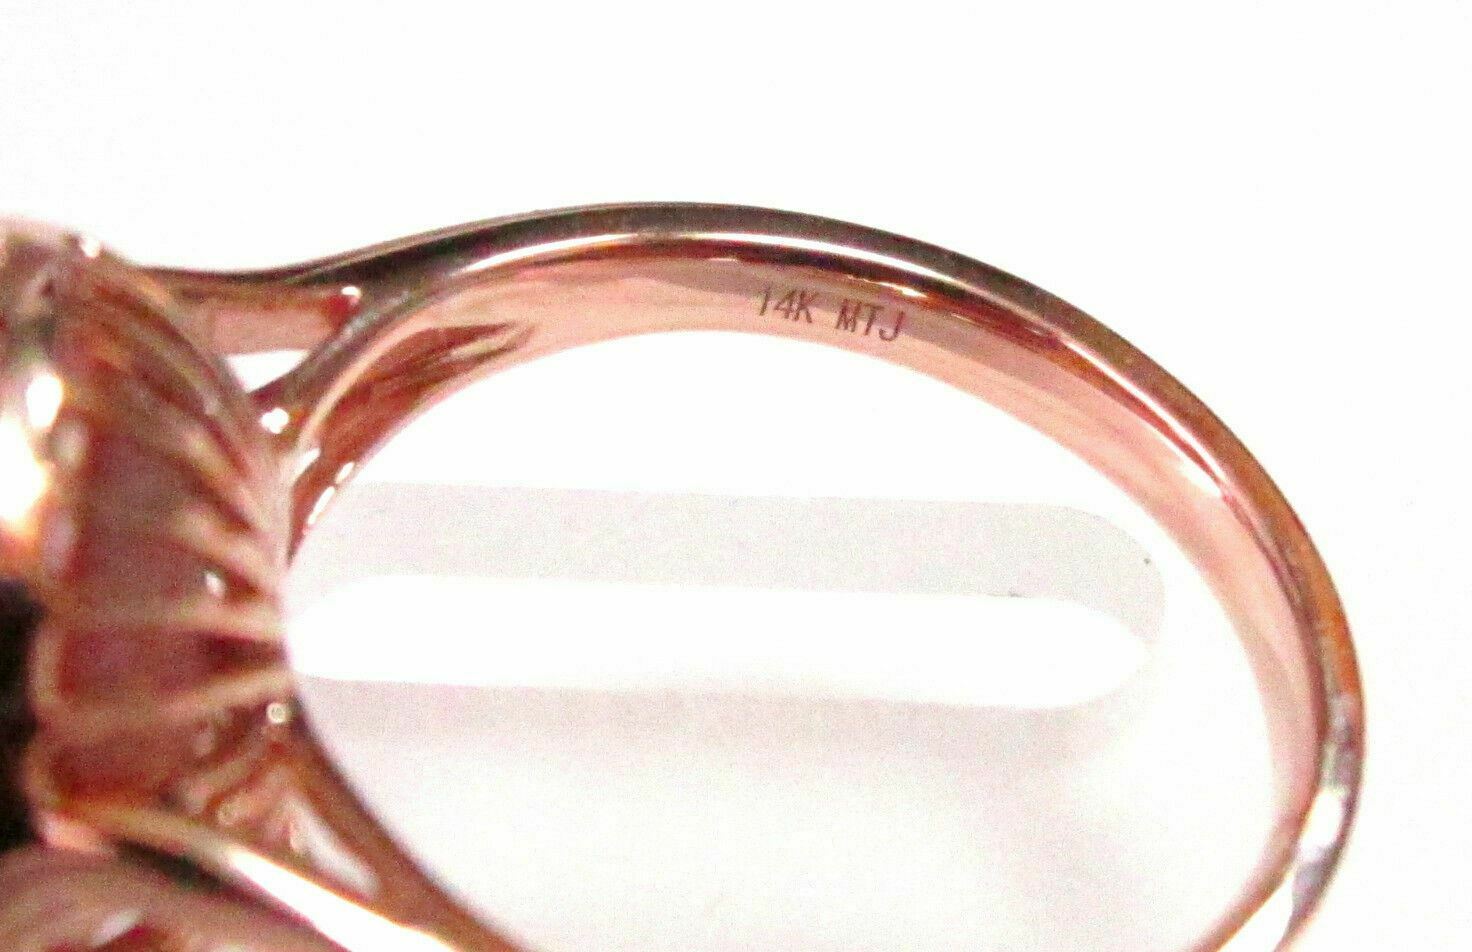 Pink Freshwater Pearl with Diamond Accents Solitaire Ring Size 7 14k Rose Gold